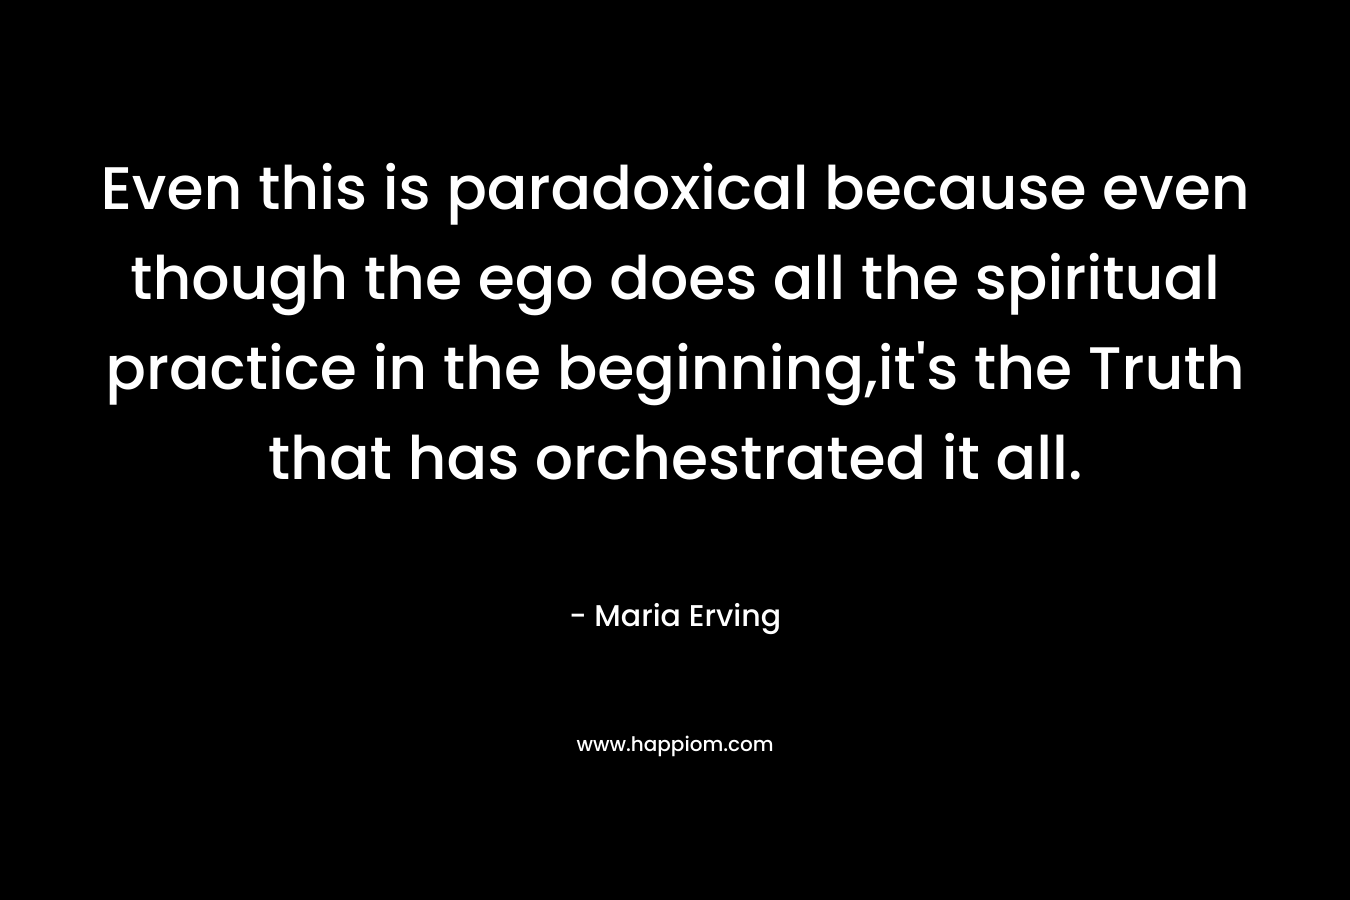 Even this is paradoxical because even though the ego does all the spiritual practice in the beginning,it’s the Truth that has orchestrated it all. – Maria Erving